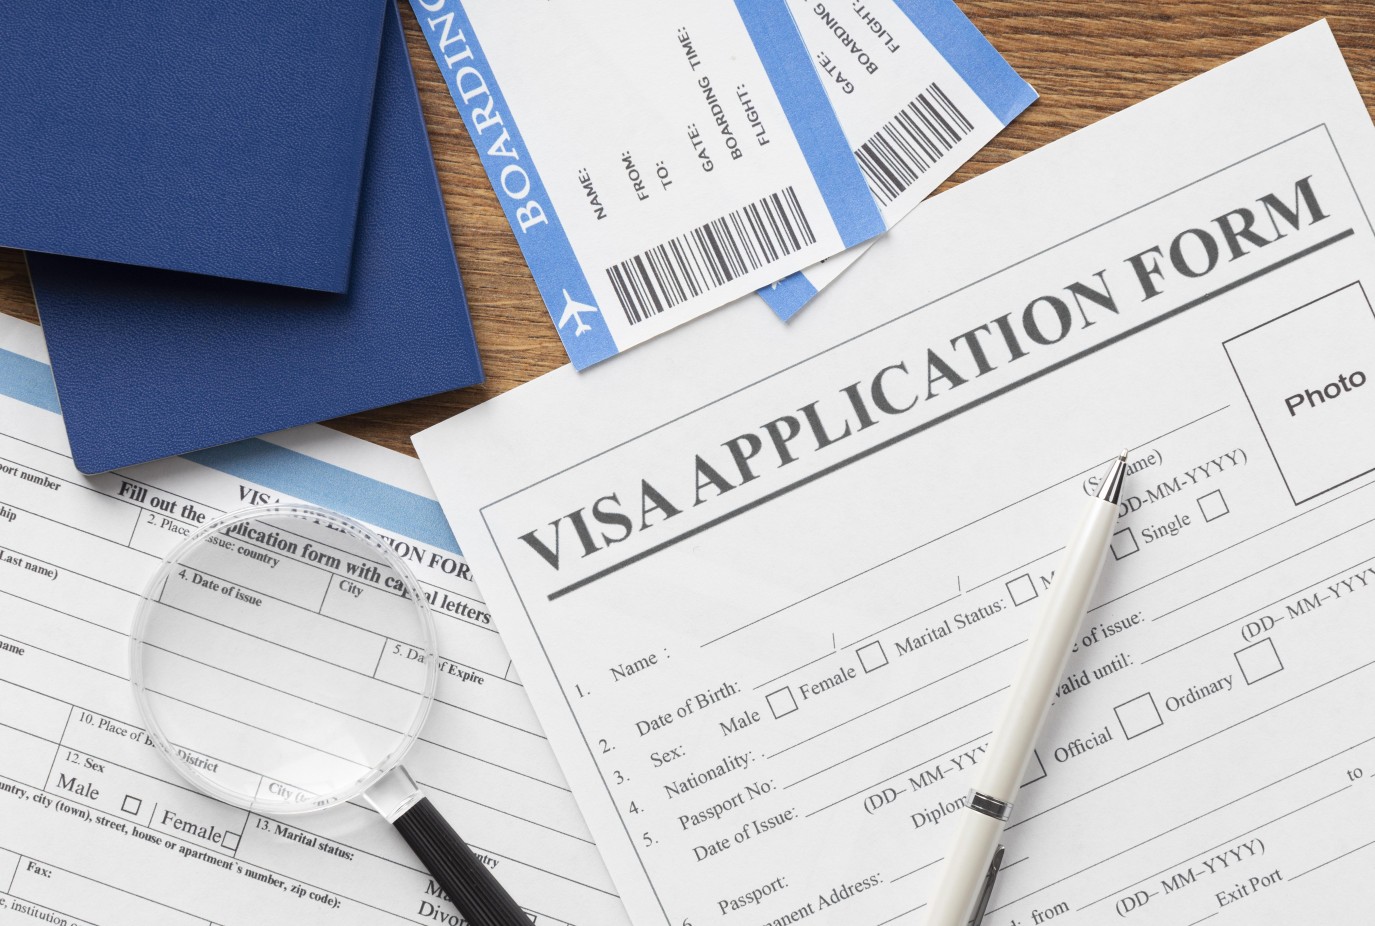 10 Common Mistakes to Avoid When Applying for a Visa